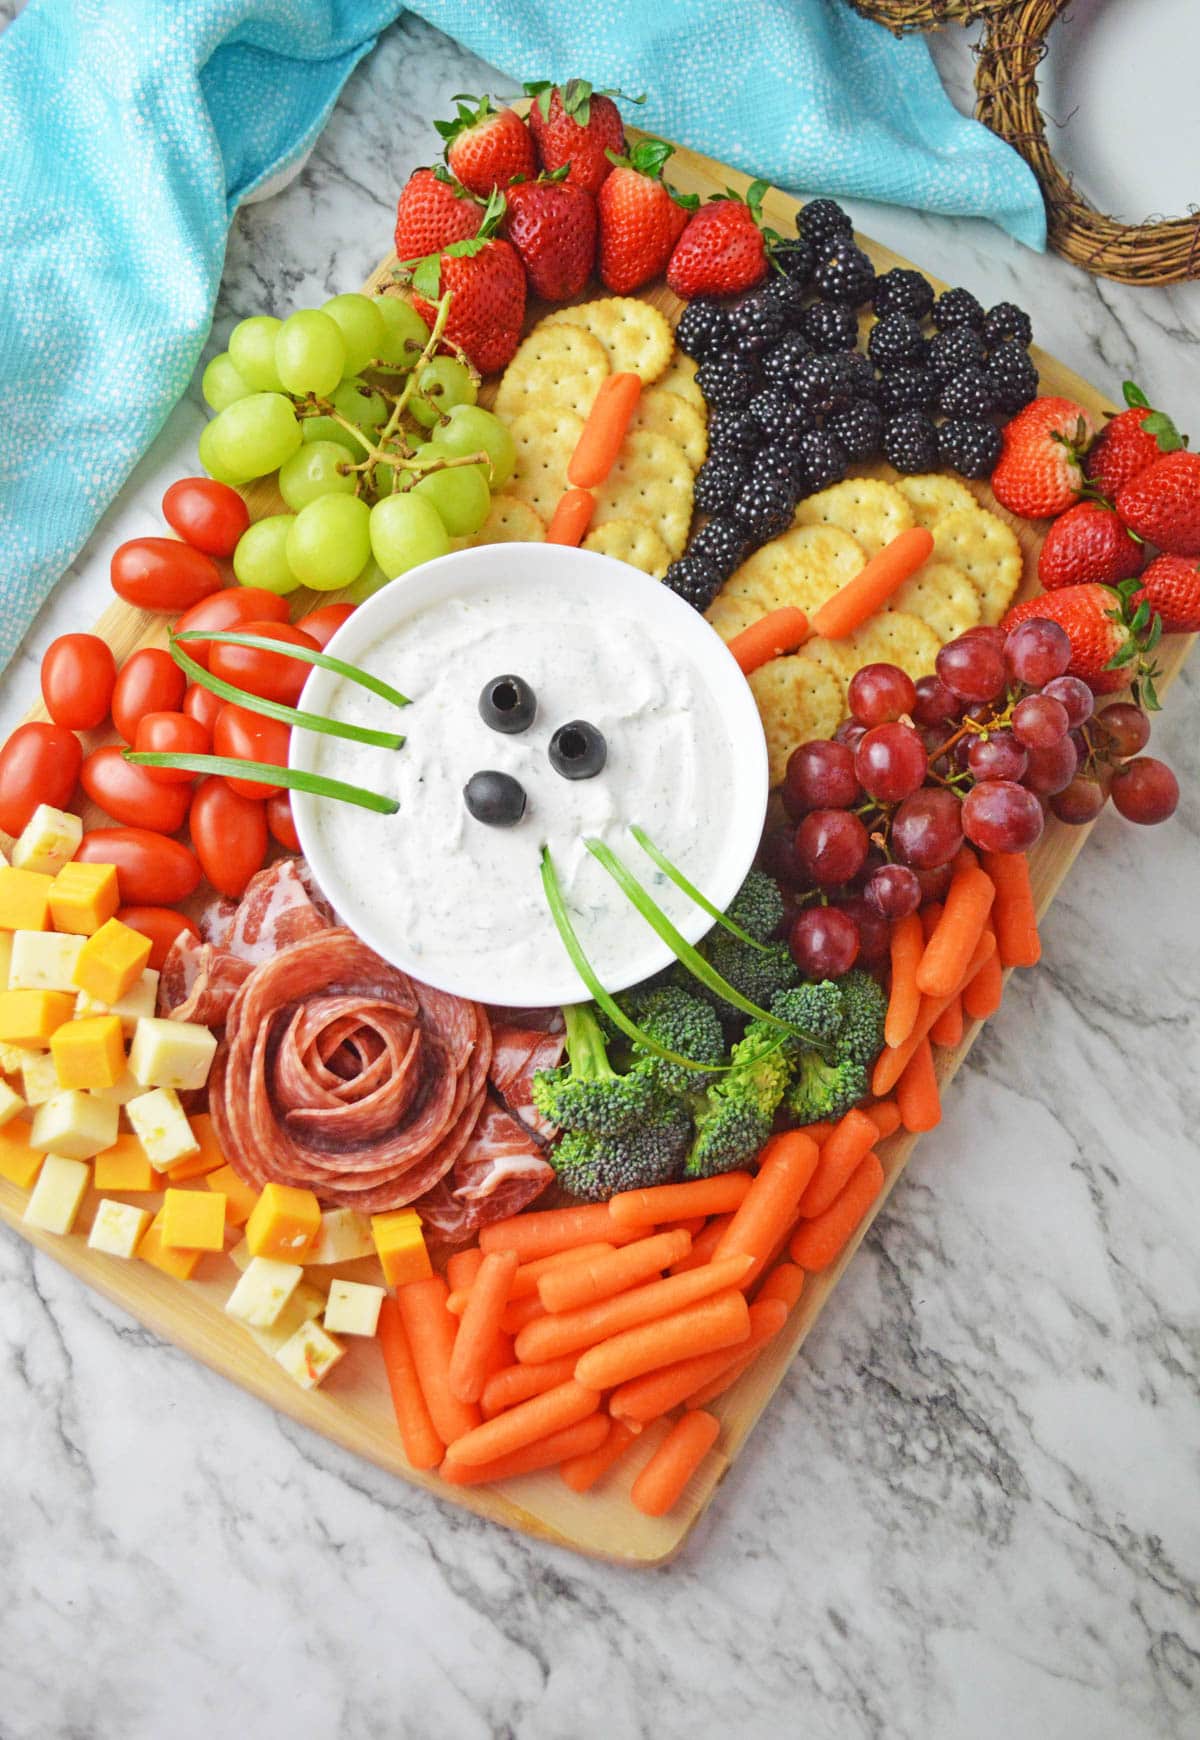 Charcuterie board with dip, fruits, veggies, cheese and crackers